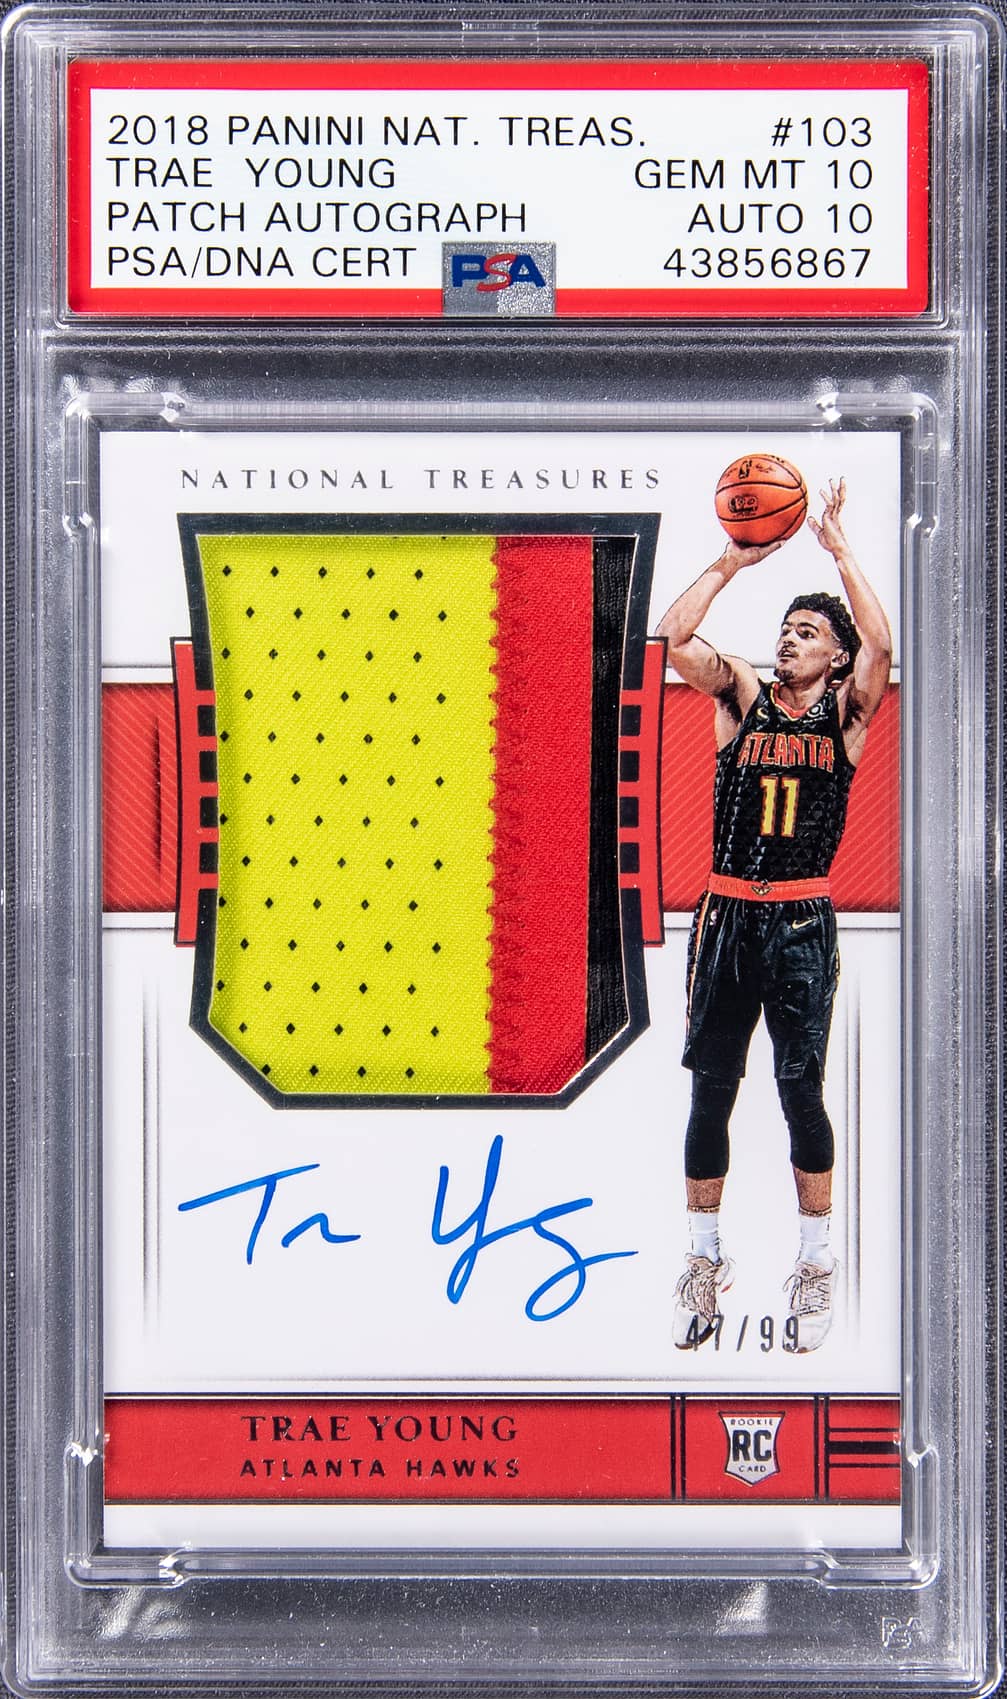 2018-19 Panini National Treasures Rookie Patch Autographs #103 Trae Young Signed Patch Rookie Card (#47/99) - PSA GEM MT 10, PSA/DNA 10